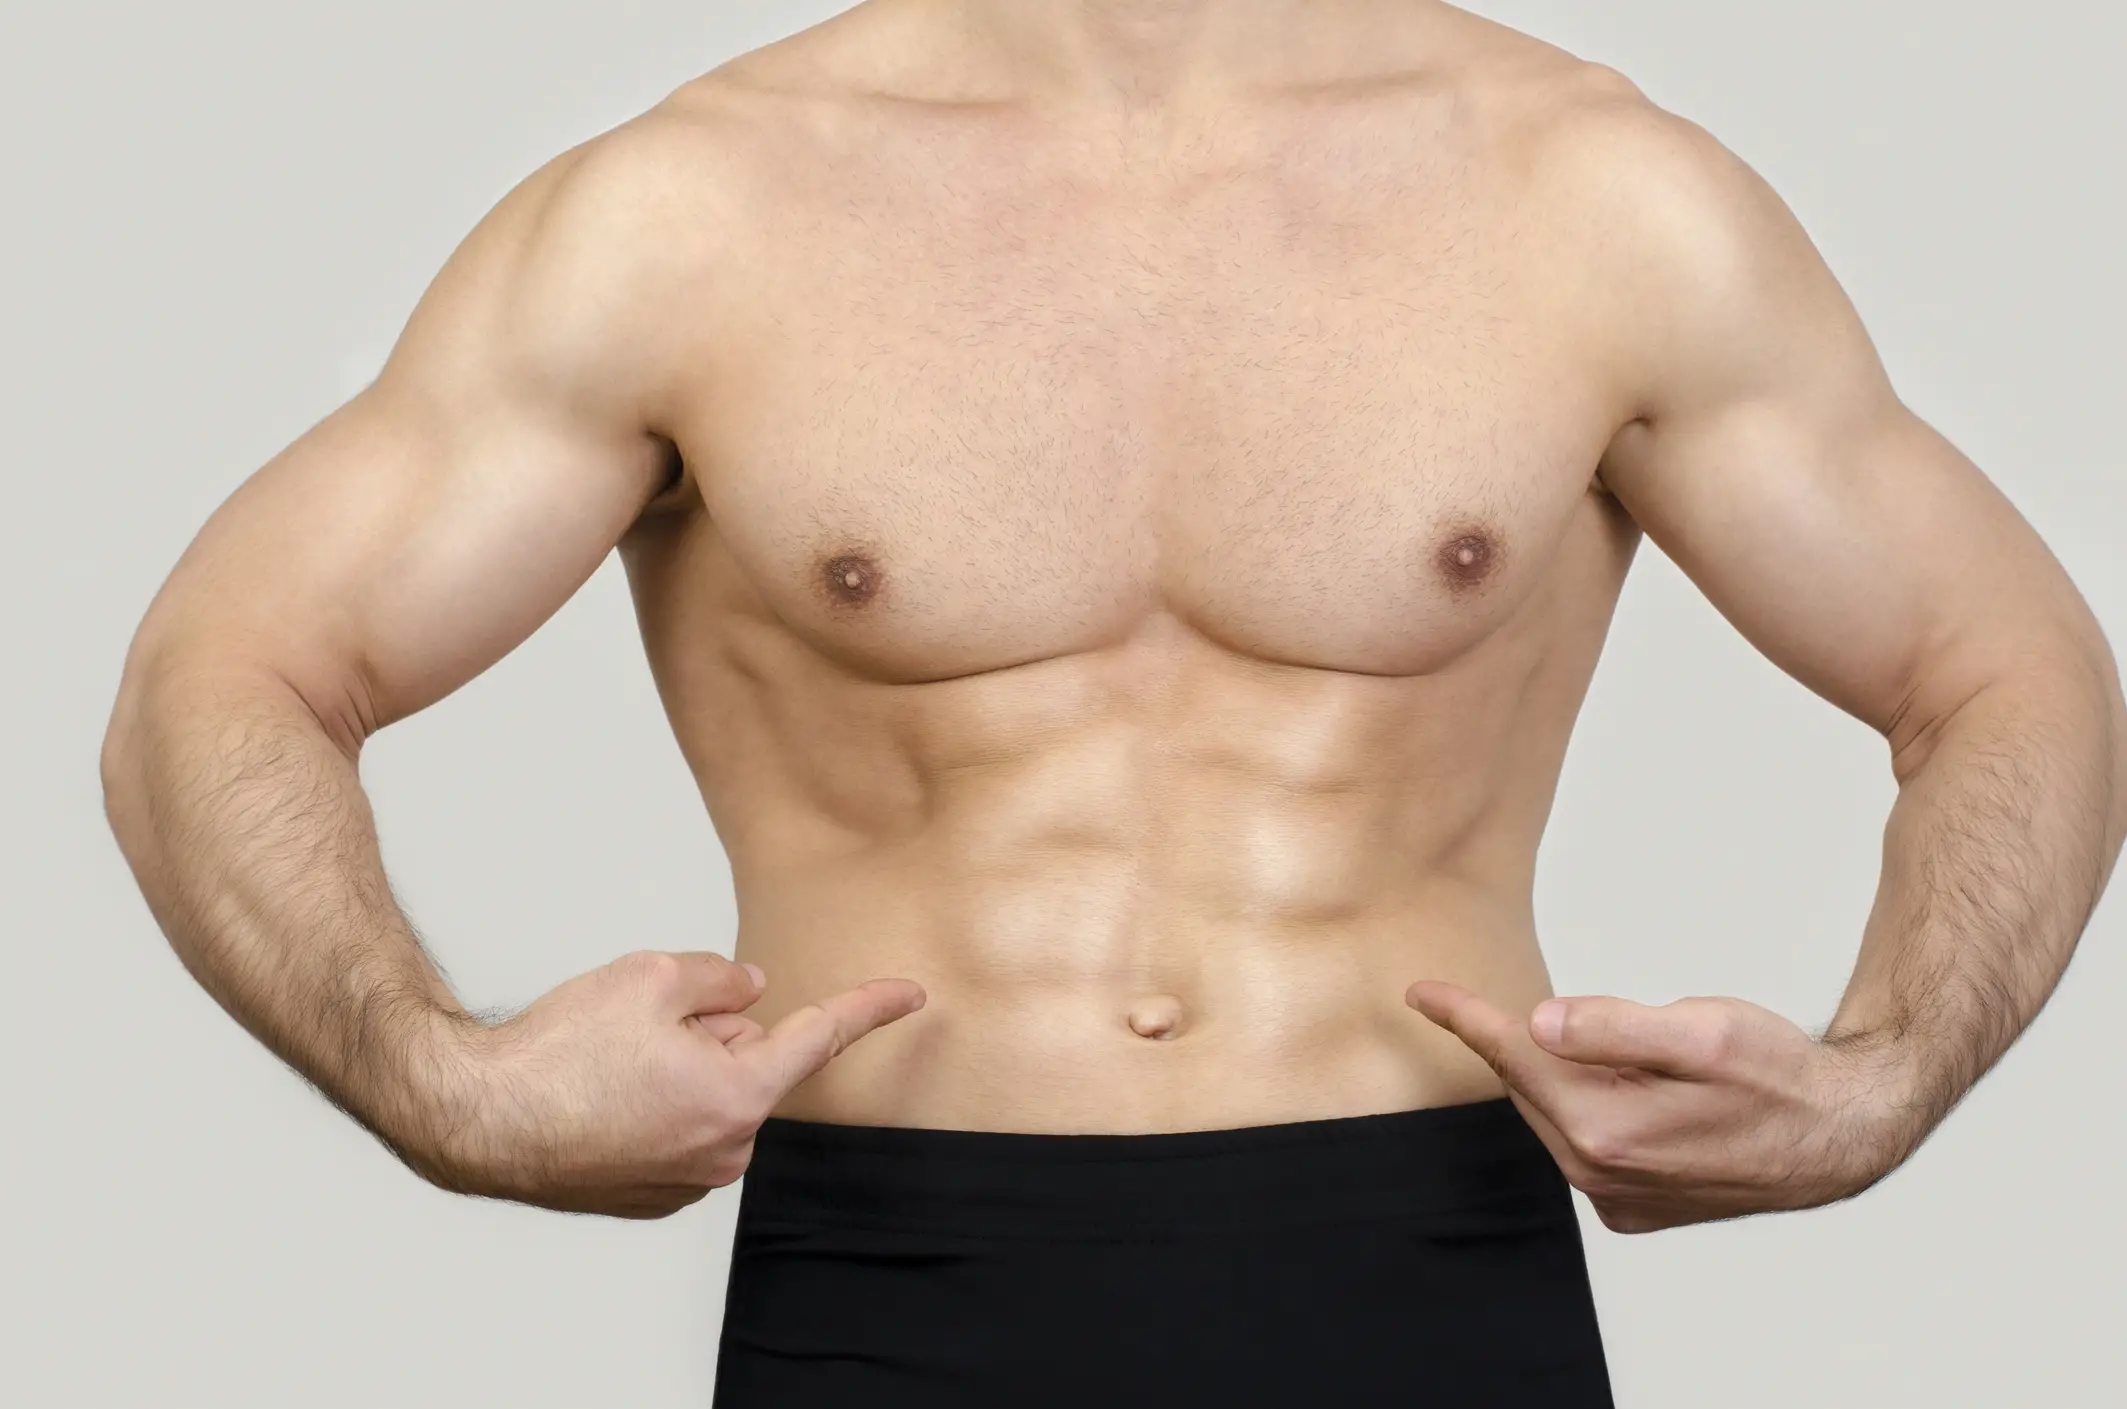 Man gaining muscle growth whilst retaining a six pack